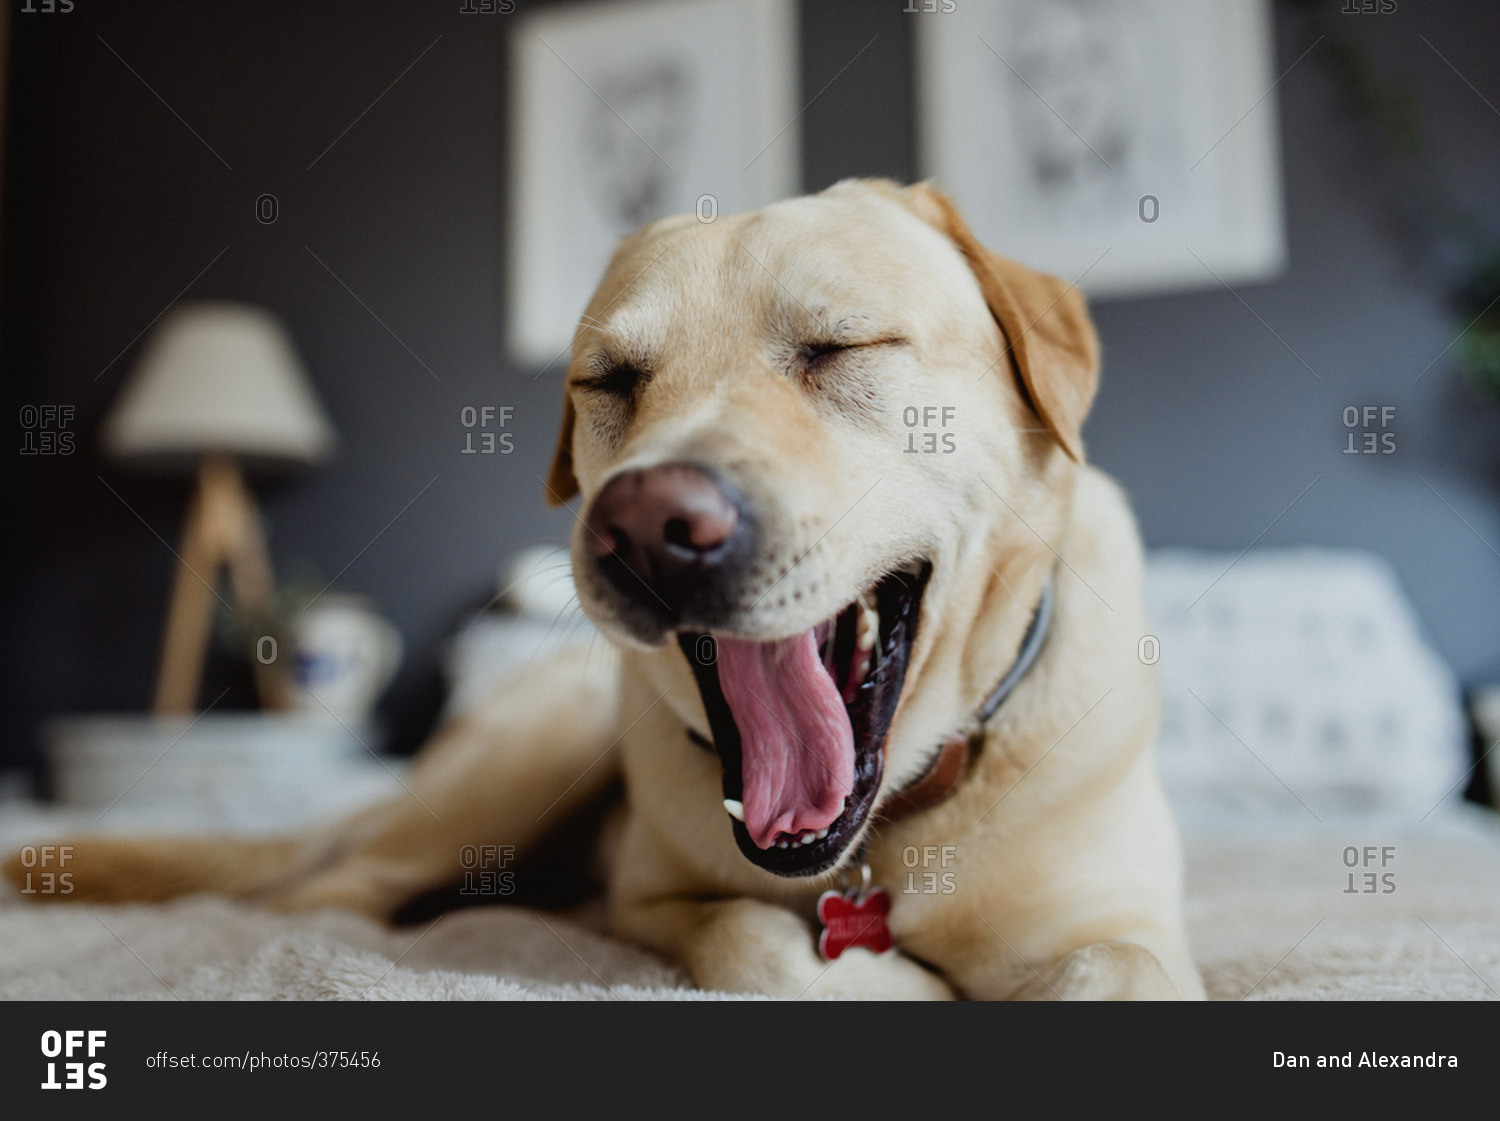 Tired dog yawning on bed